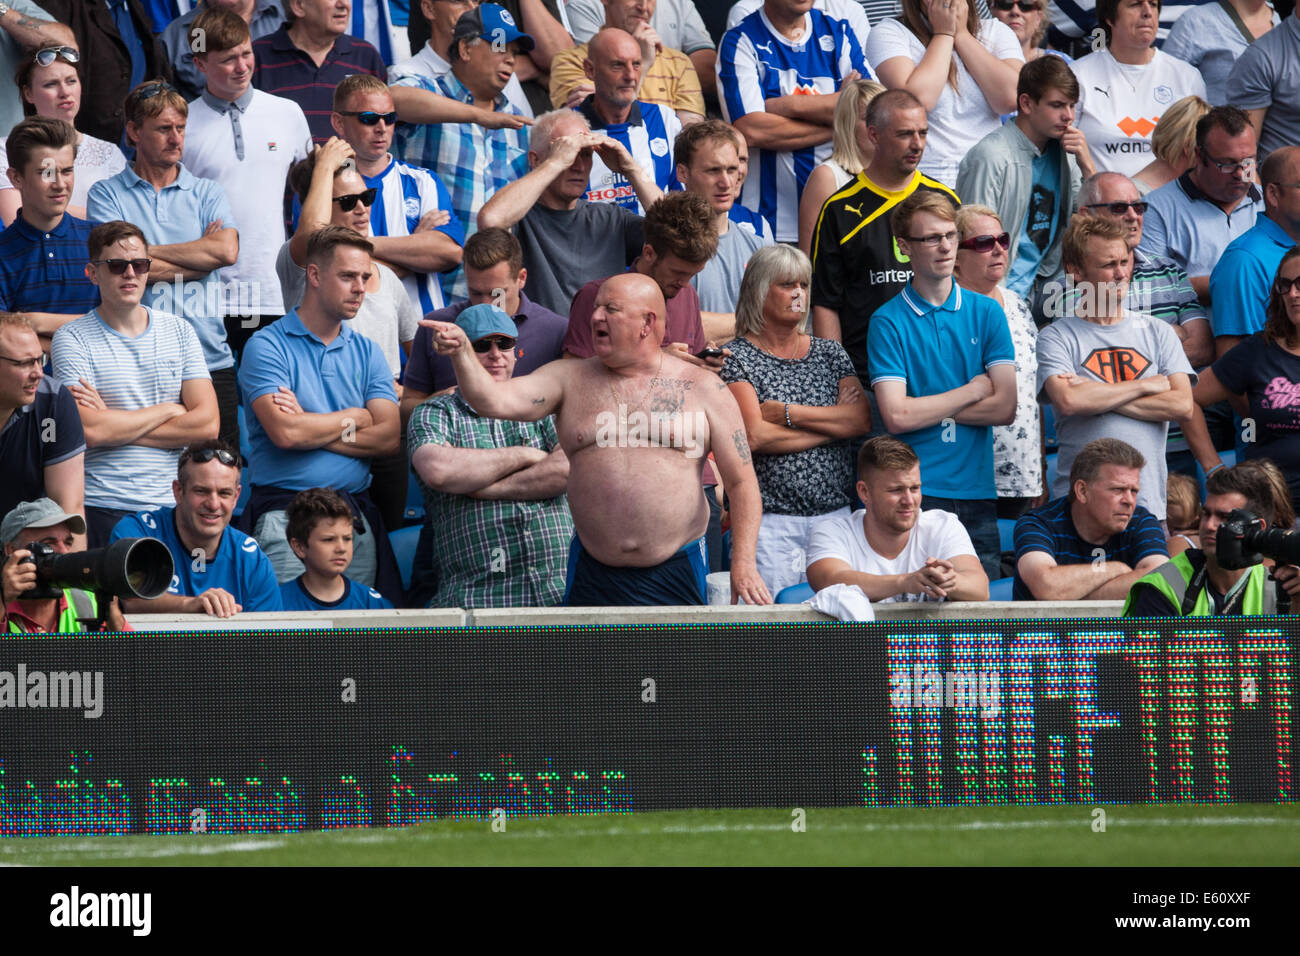 Overweight man in a football crowd Stock Photo